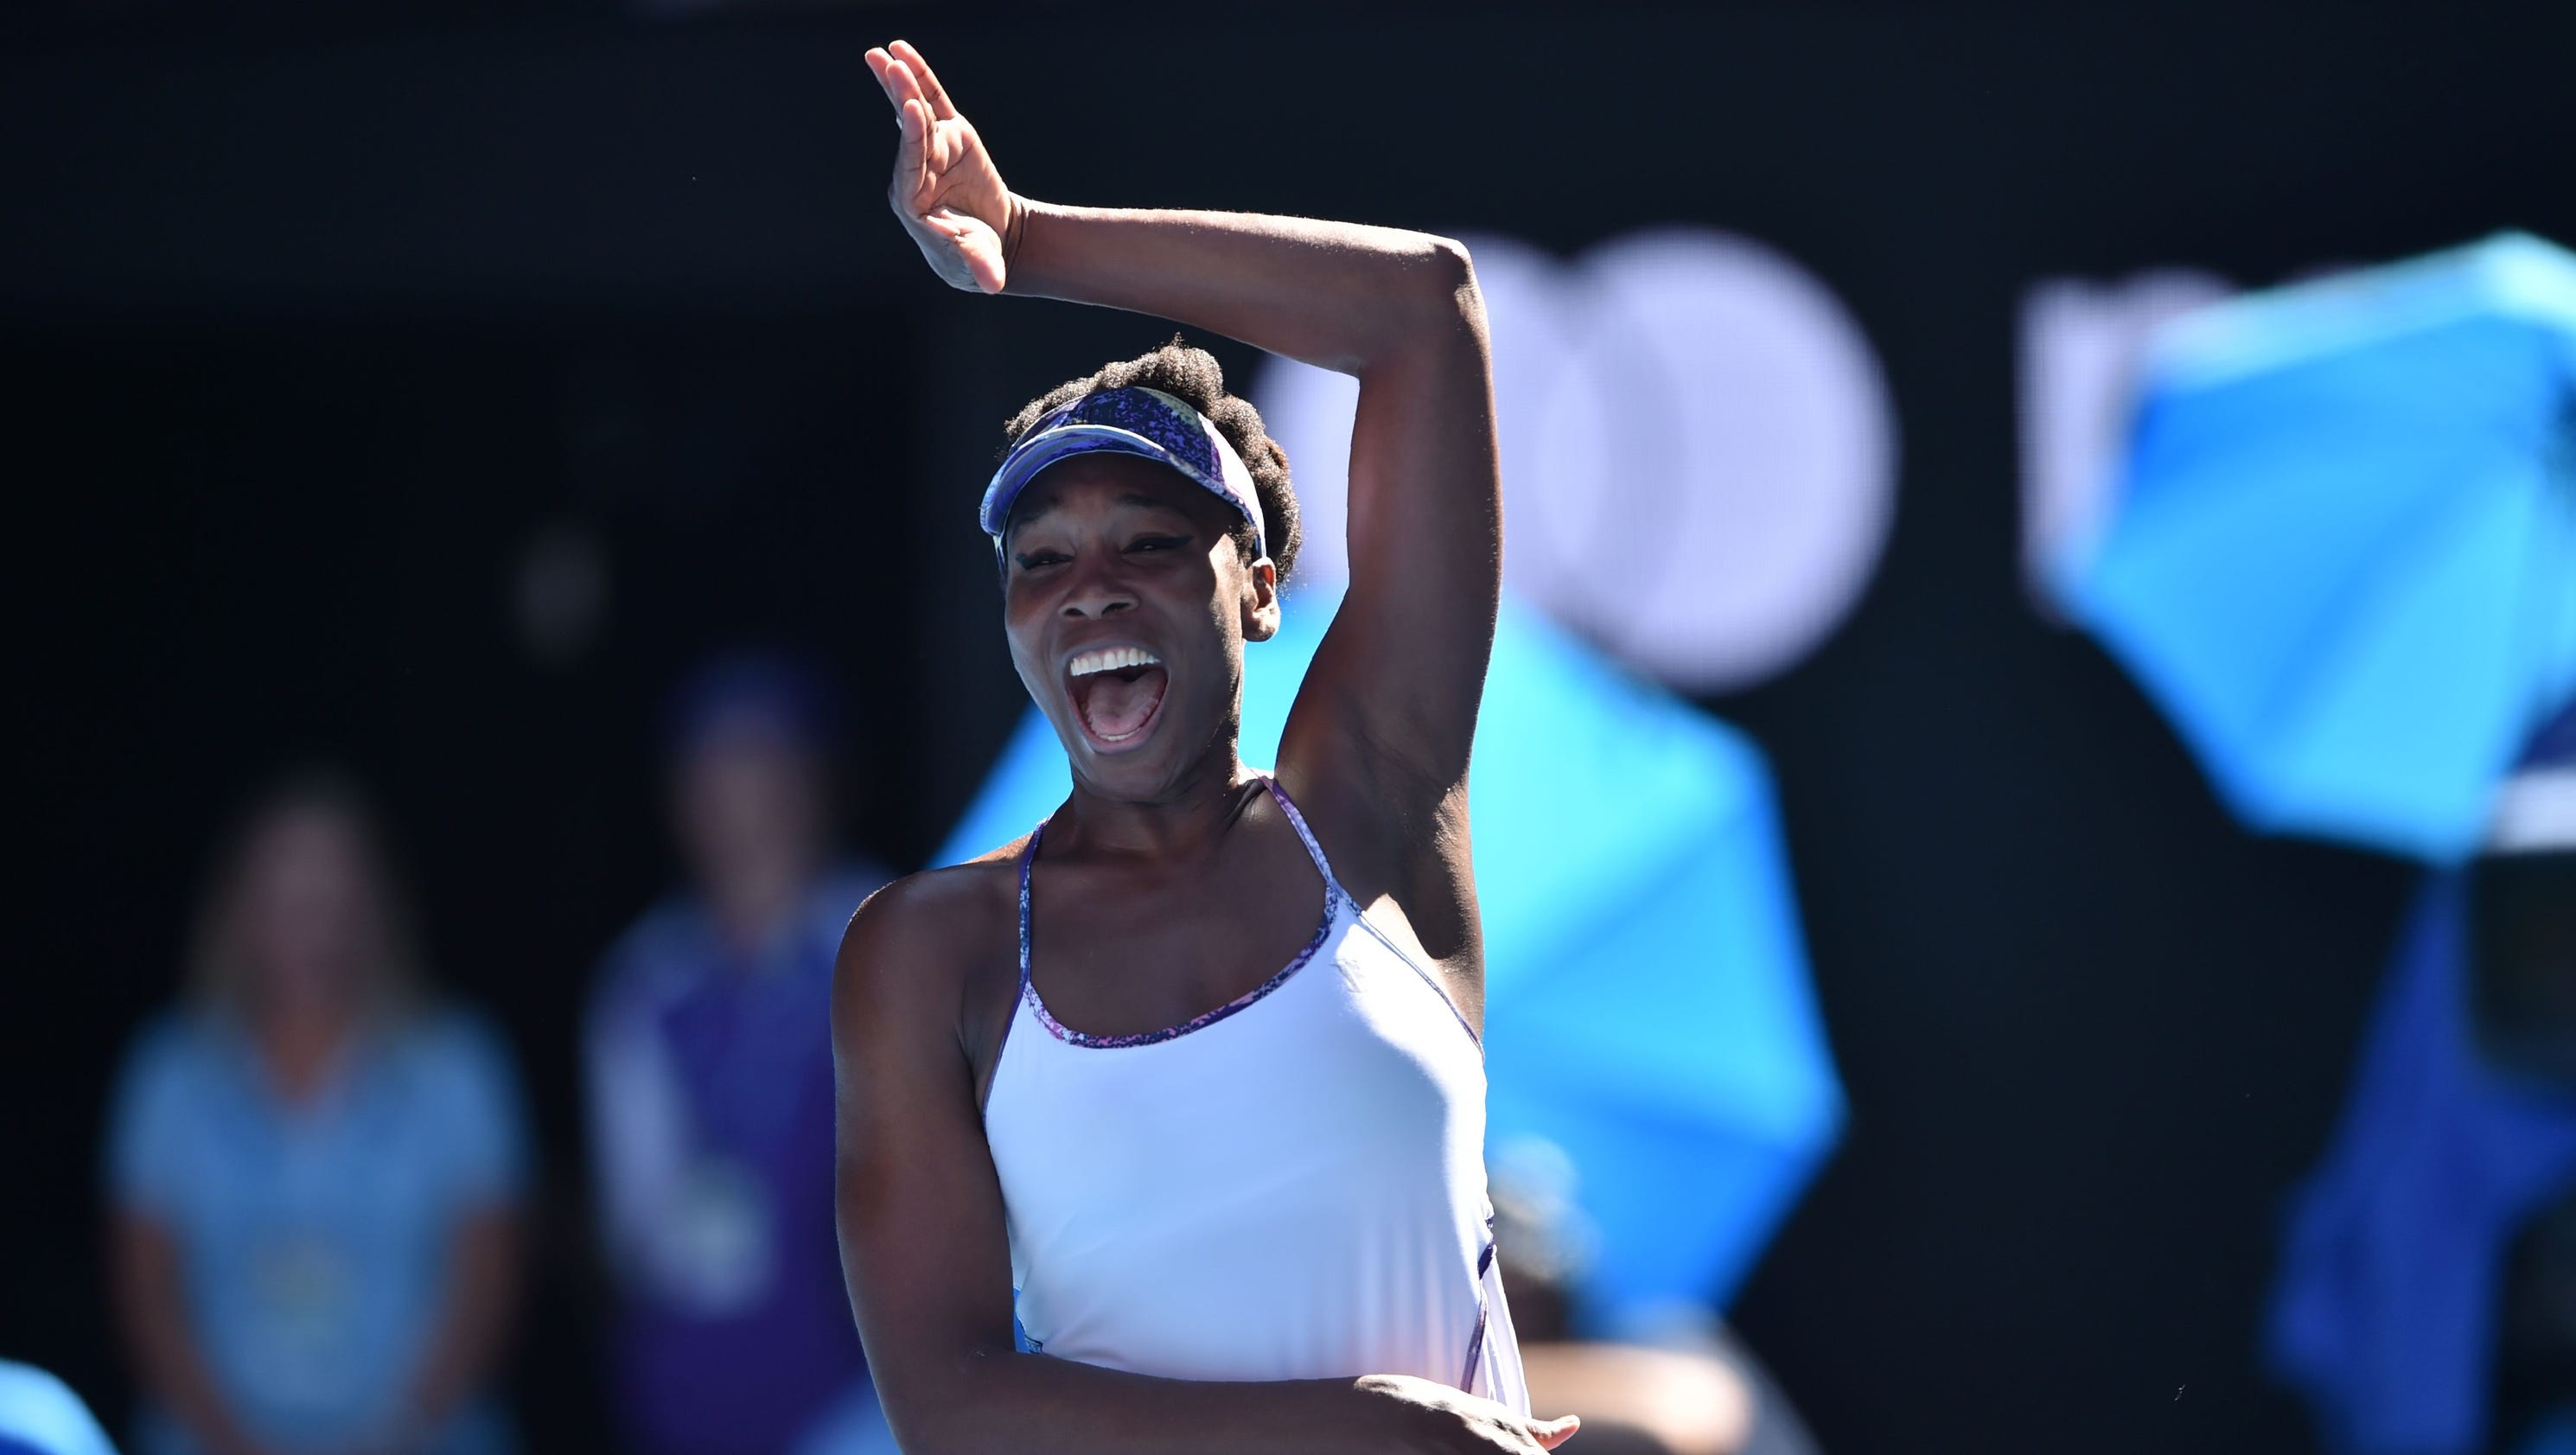 Venus Williams can't contain herself after reaching Australian Open final3200 x 1680